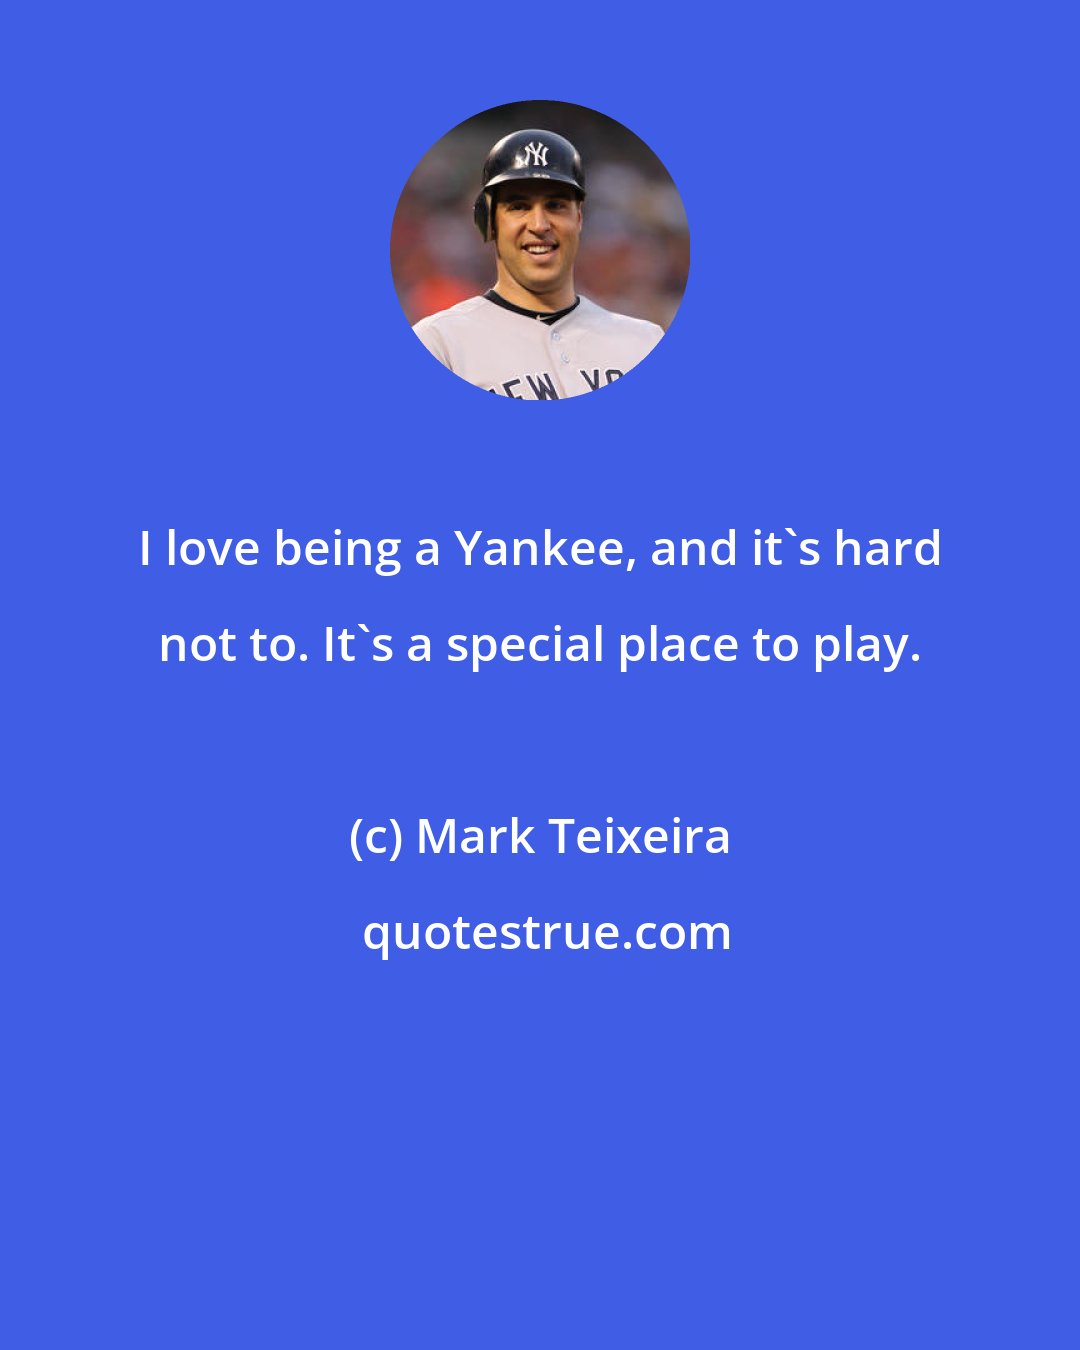 Mark Teixeira: I love being a Yankee, and it's hard not to. It's a special place to play.